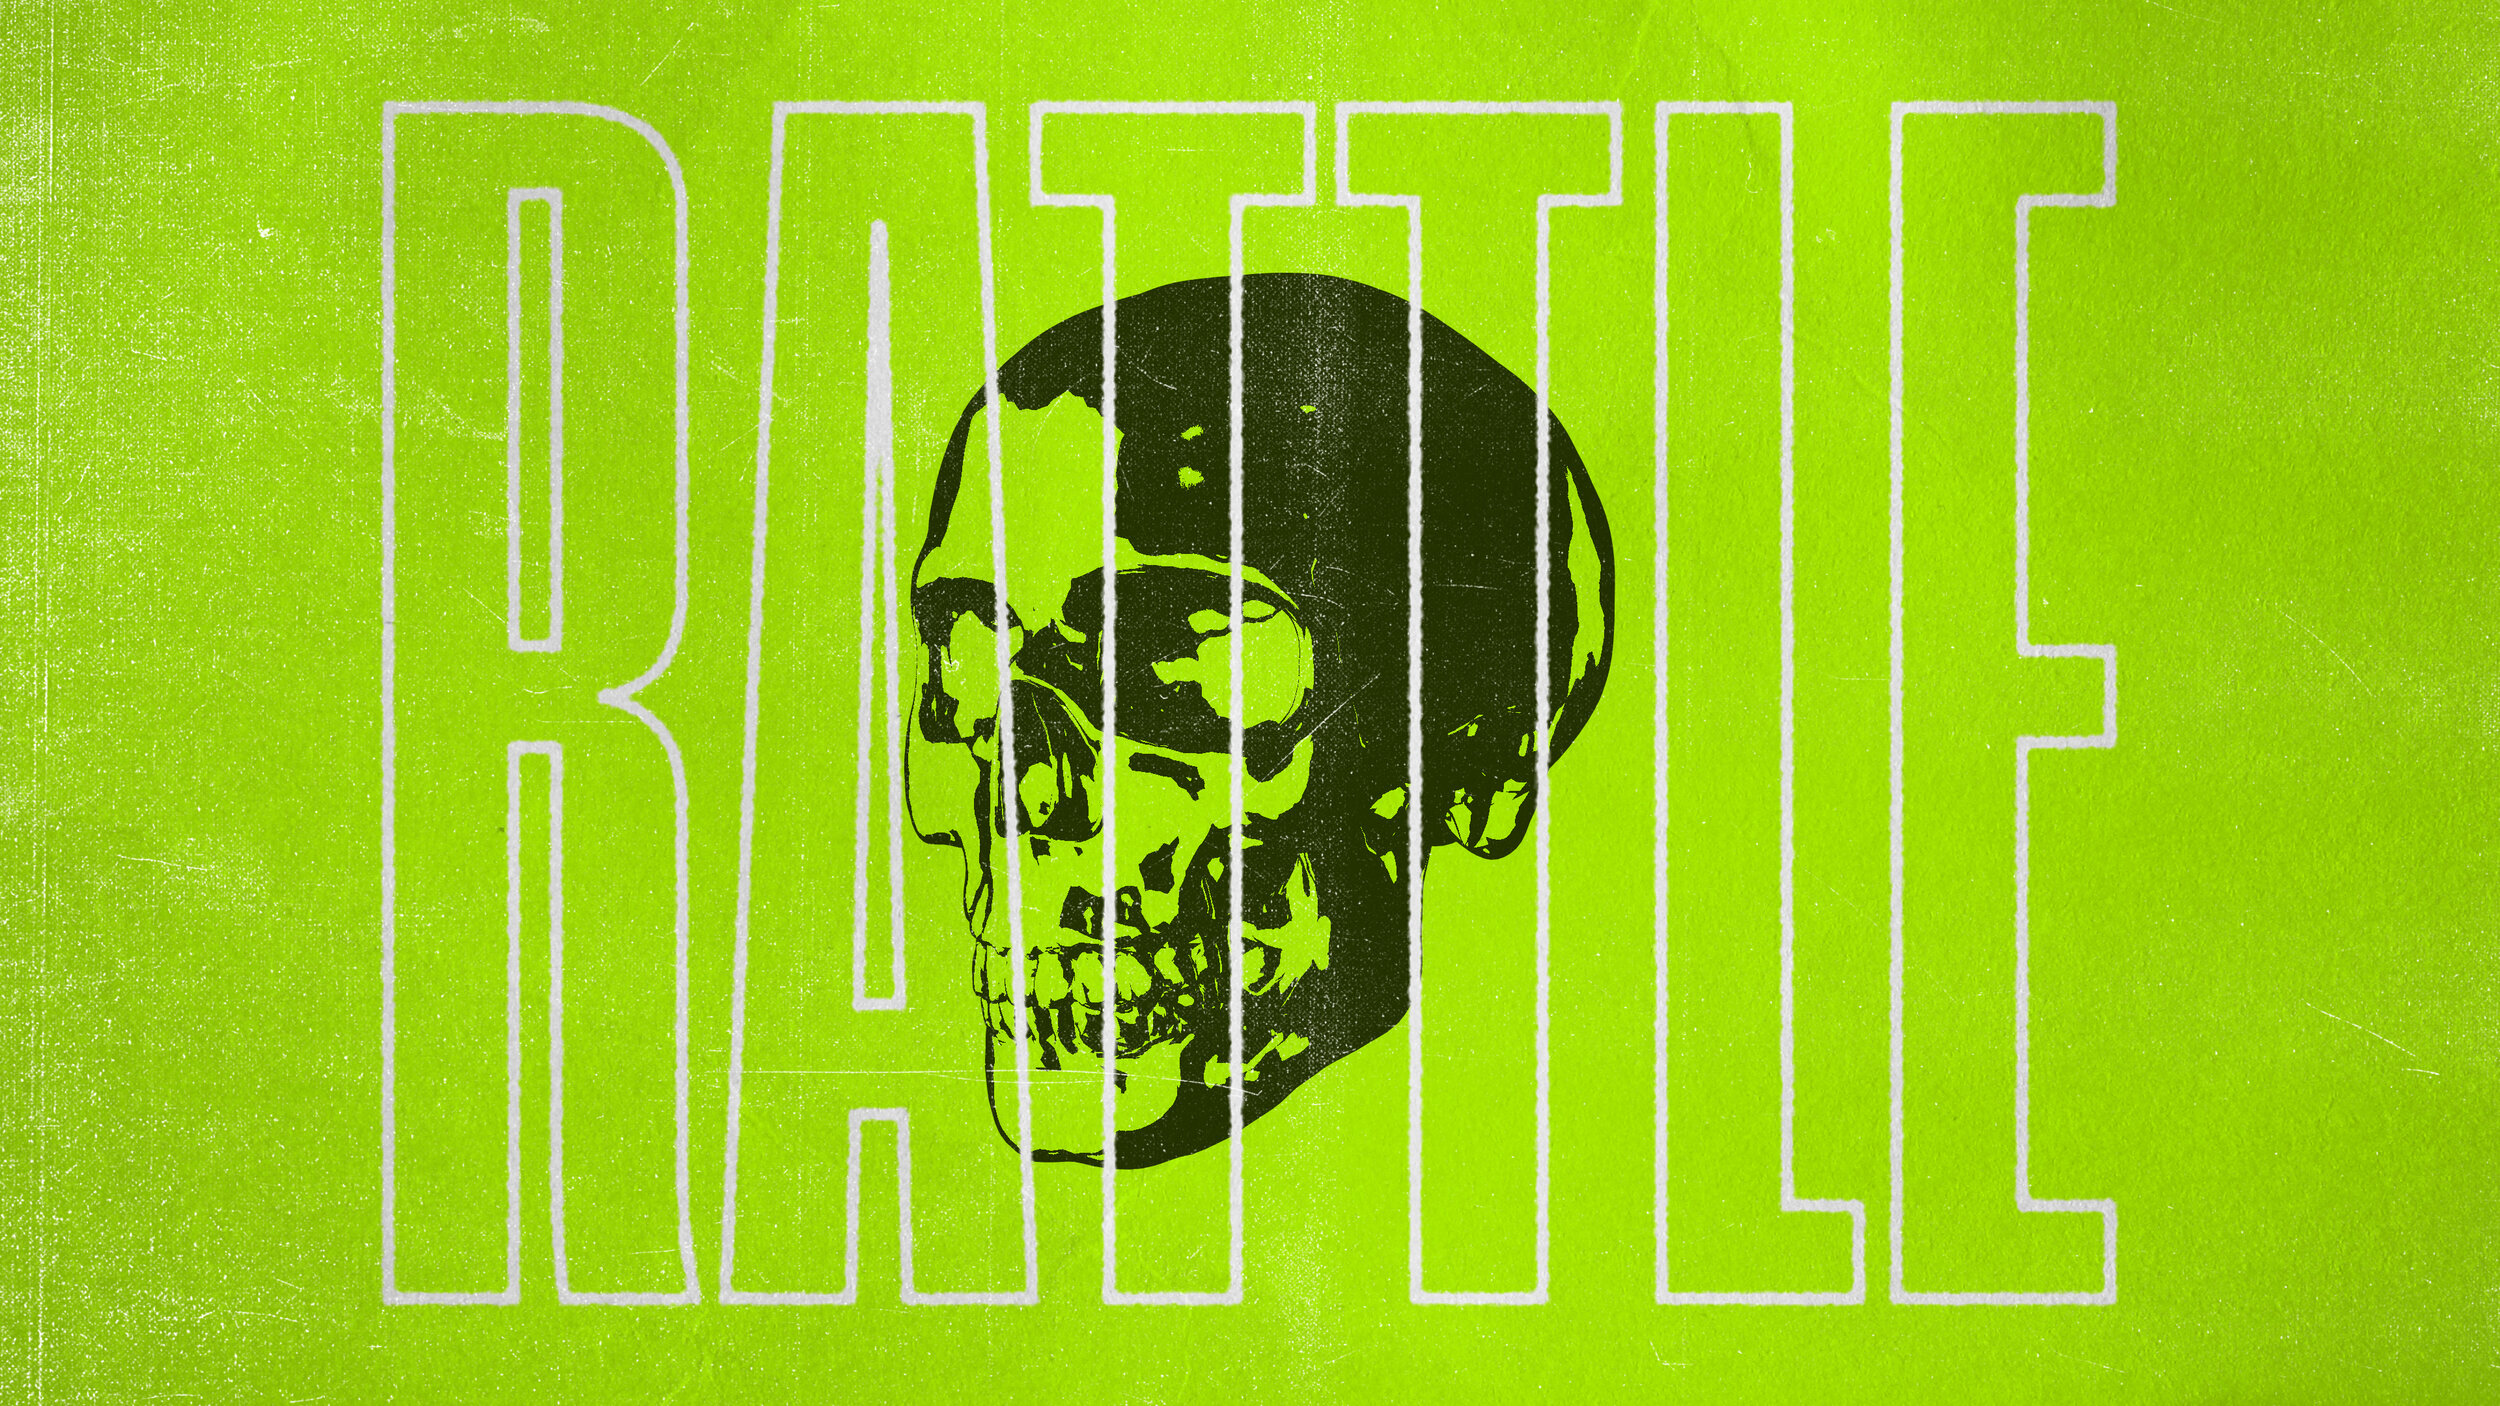 SeeingSounds_Rattle_TitleGraphic1_1920x1080.jpg